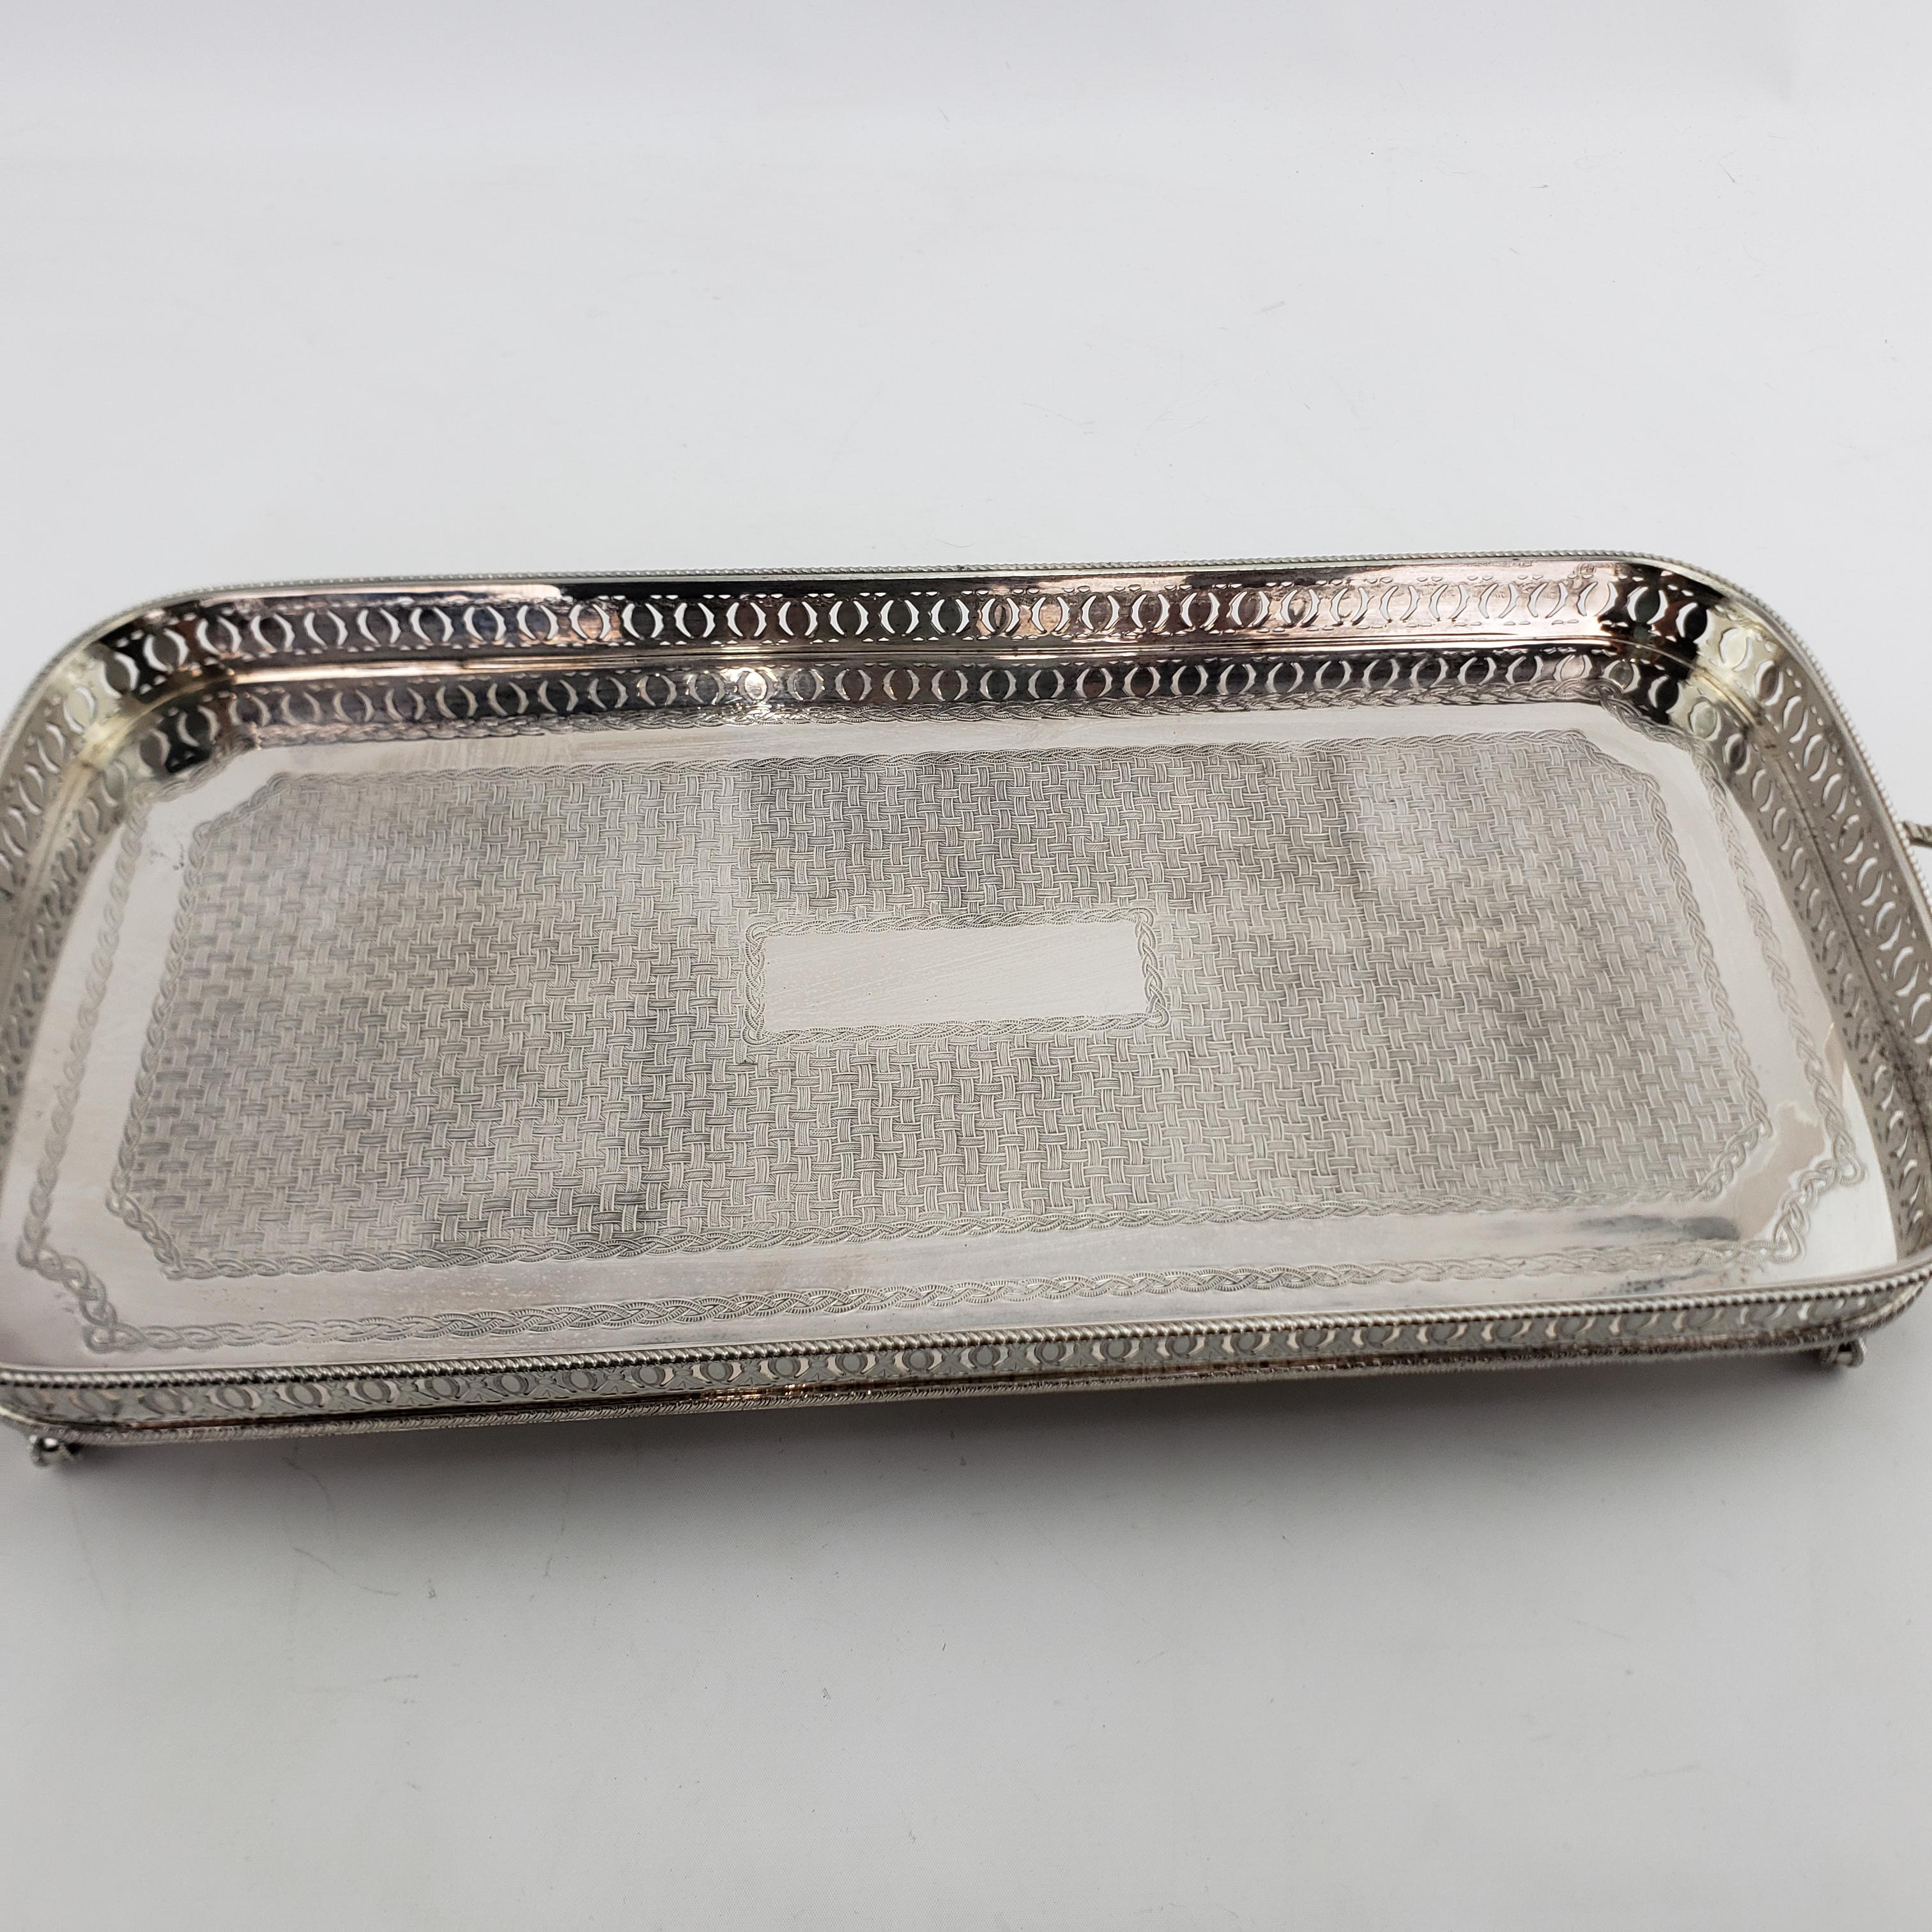 Antique English Silver Plated Gallery Serving Tray with Engraved Weave Decor For Sale 4